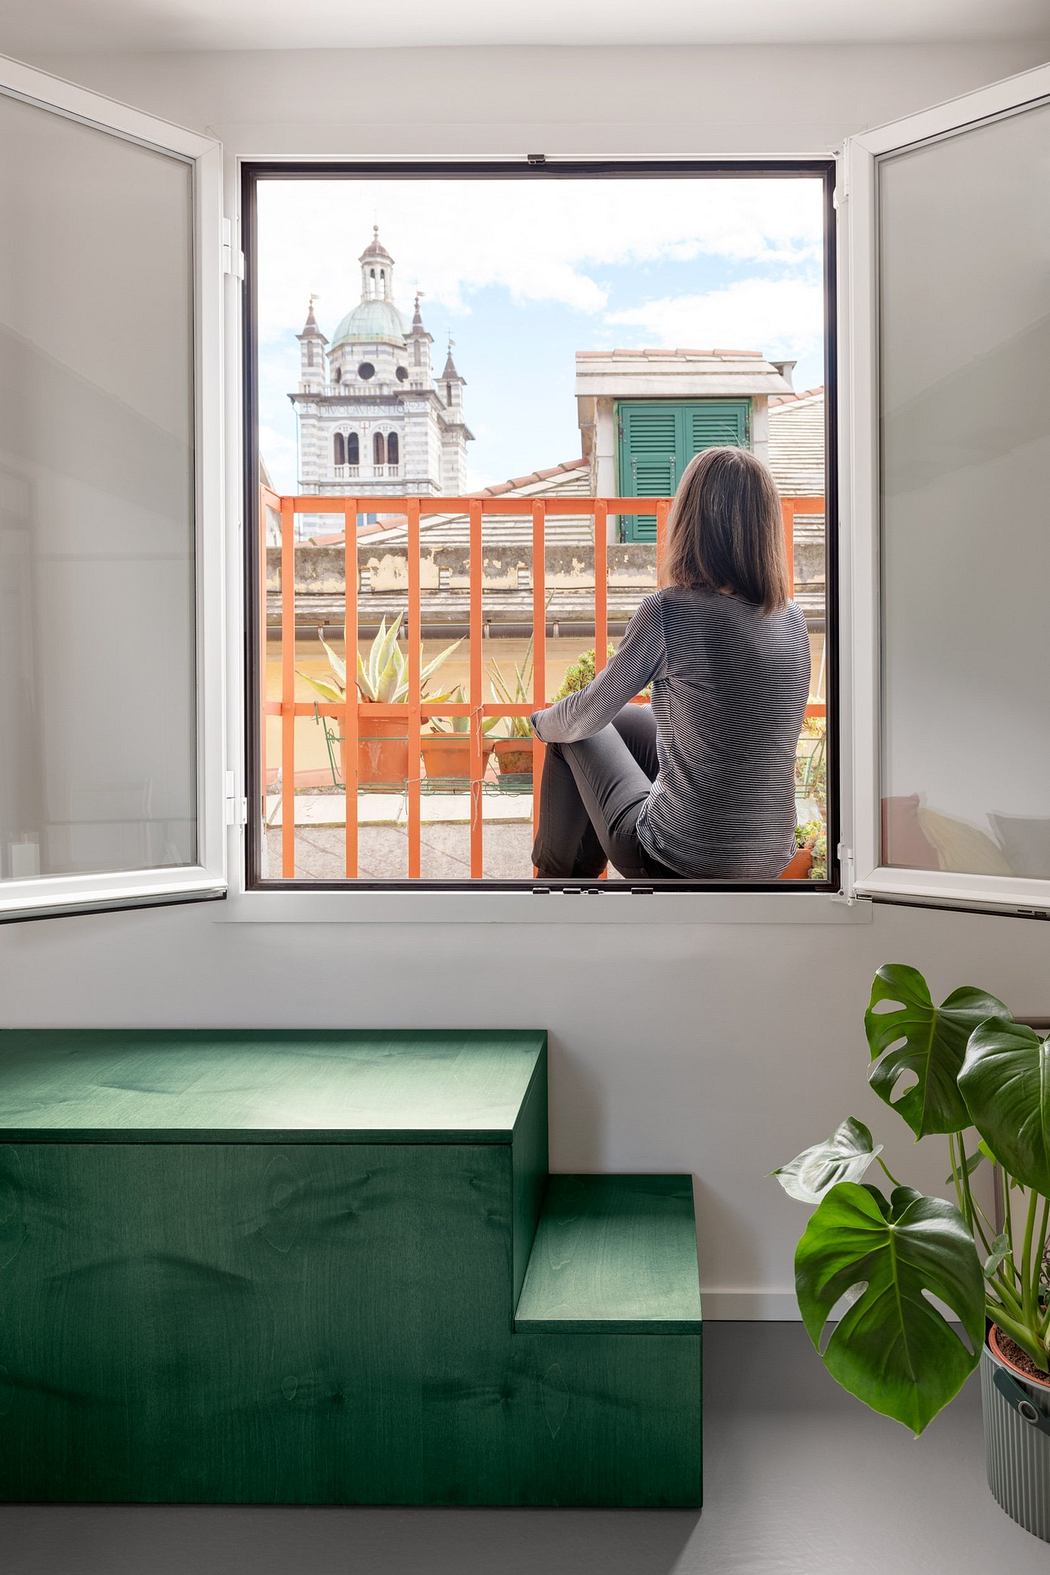 Person seated at a window nook with green steps, overlooking urban scenery.